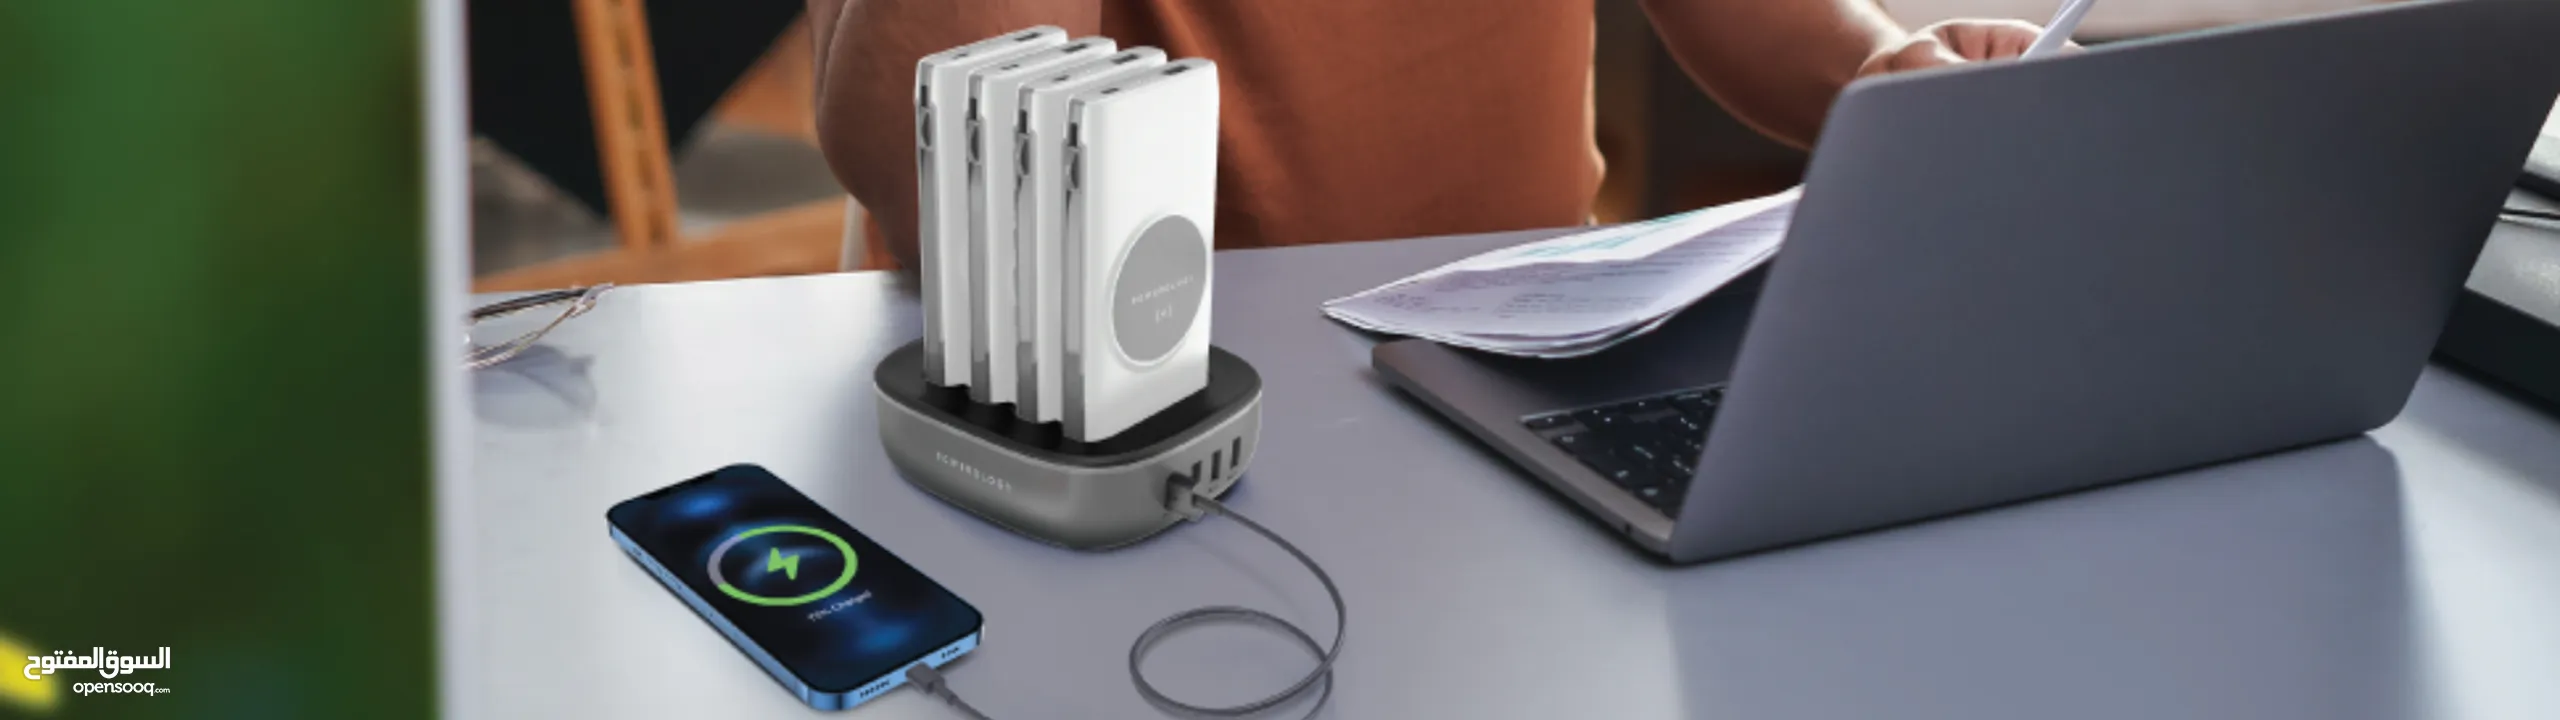 Powerology 4 in 1 Power Bank station